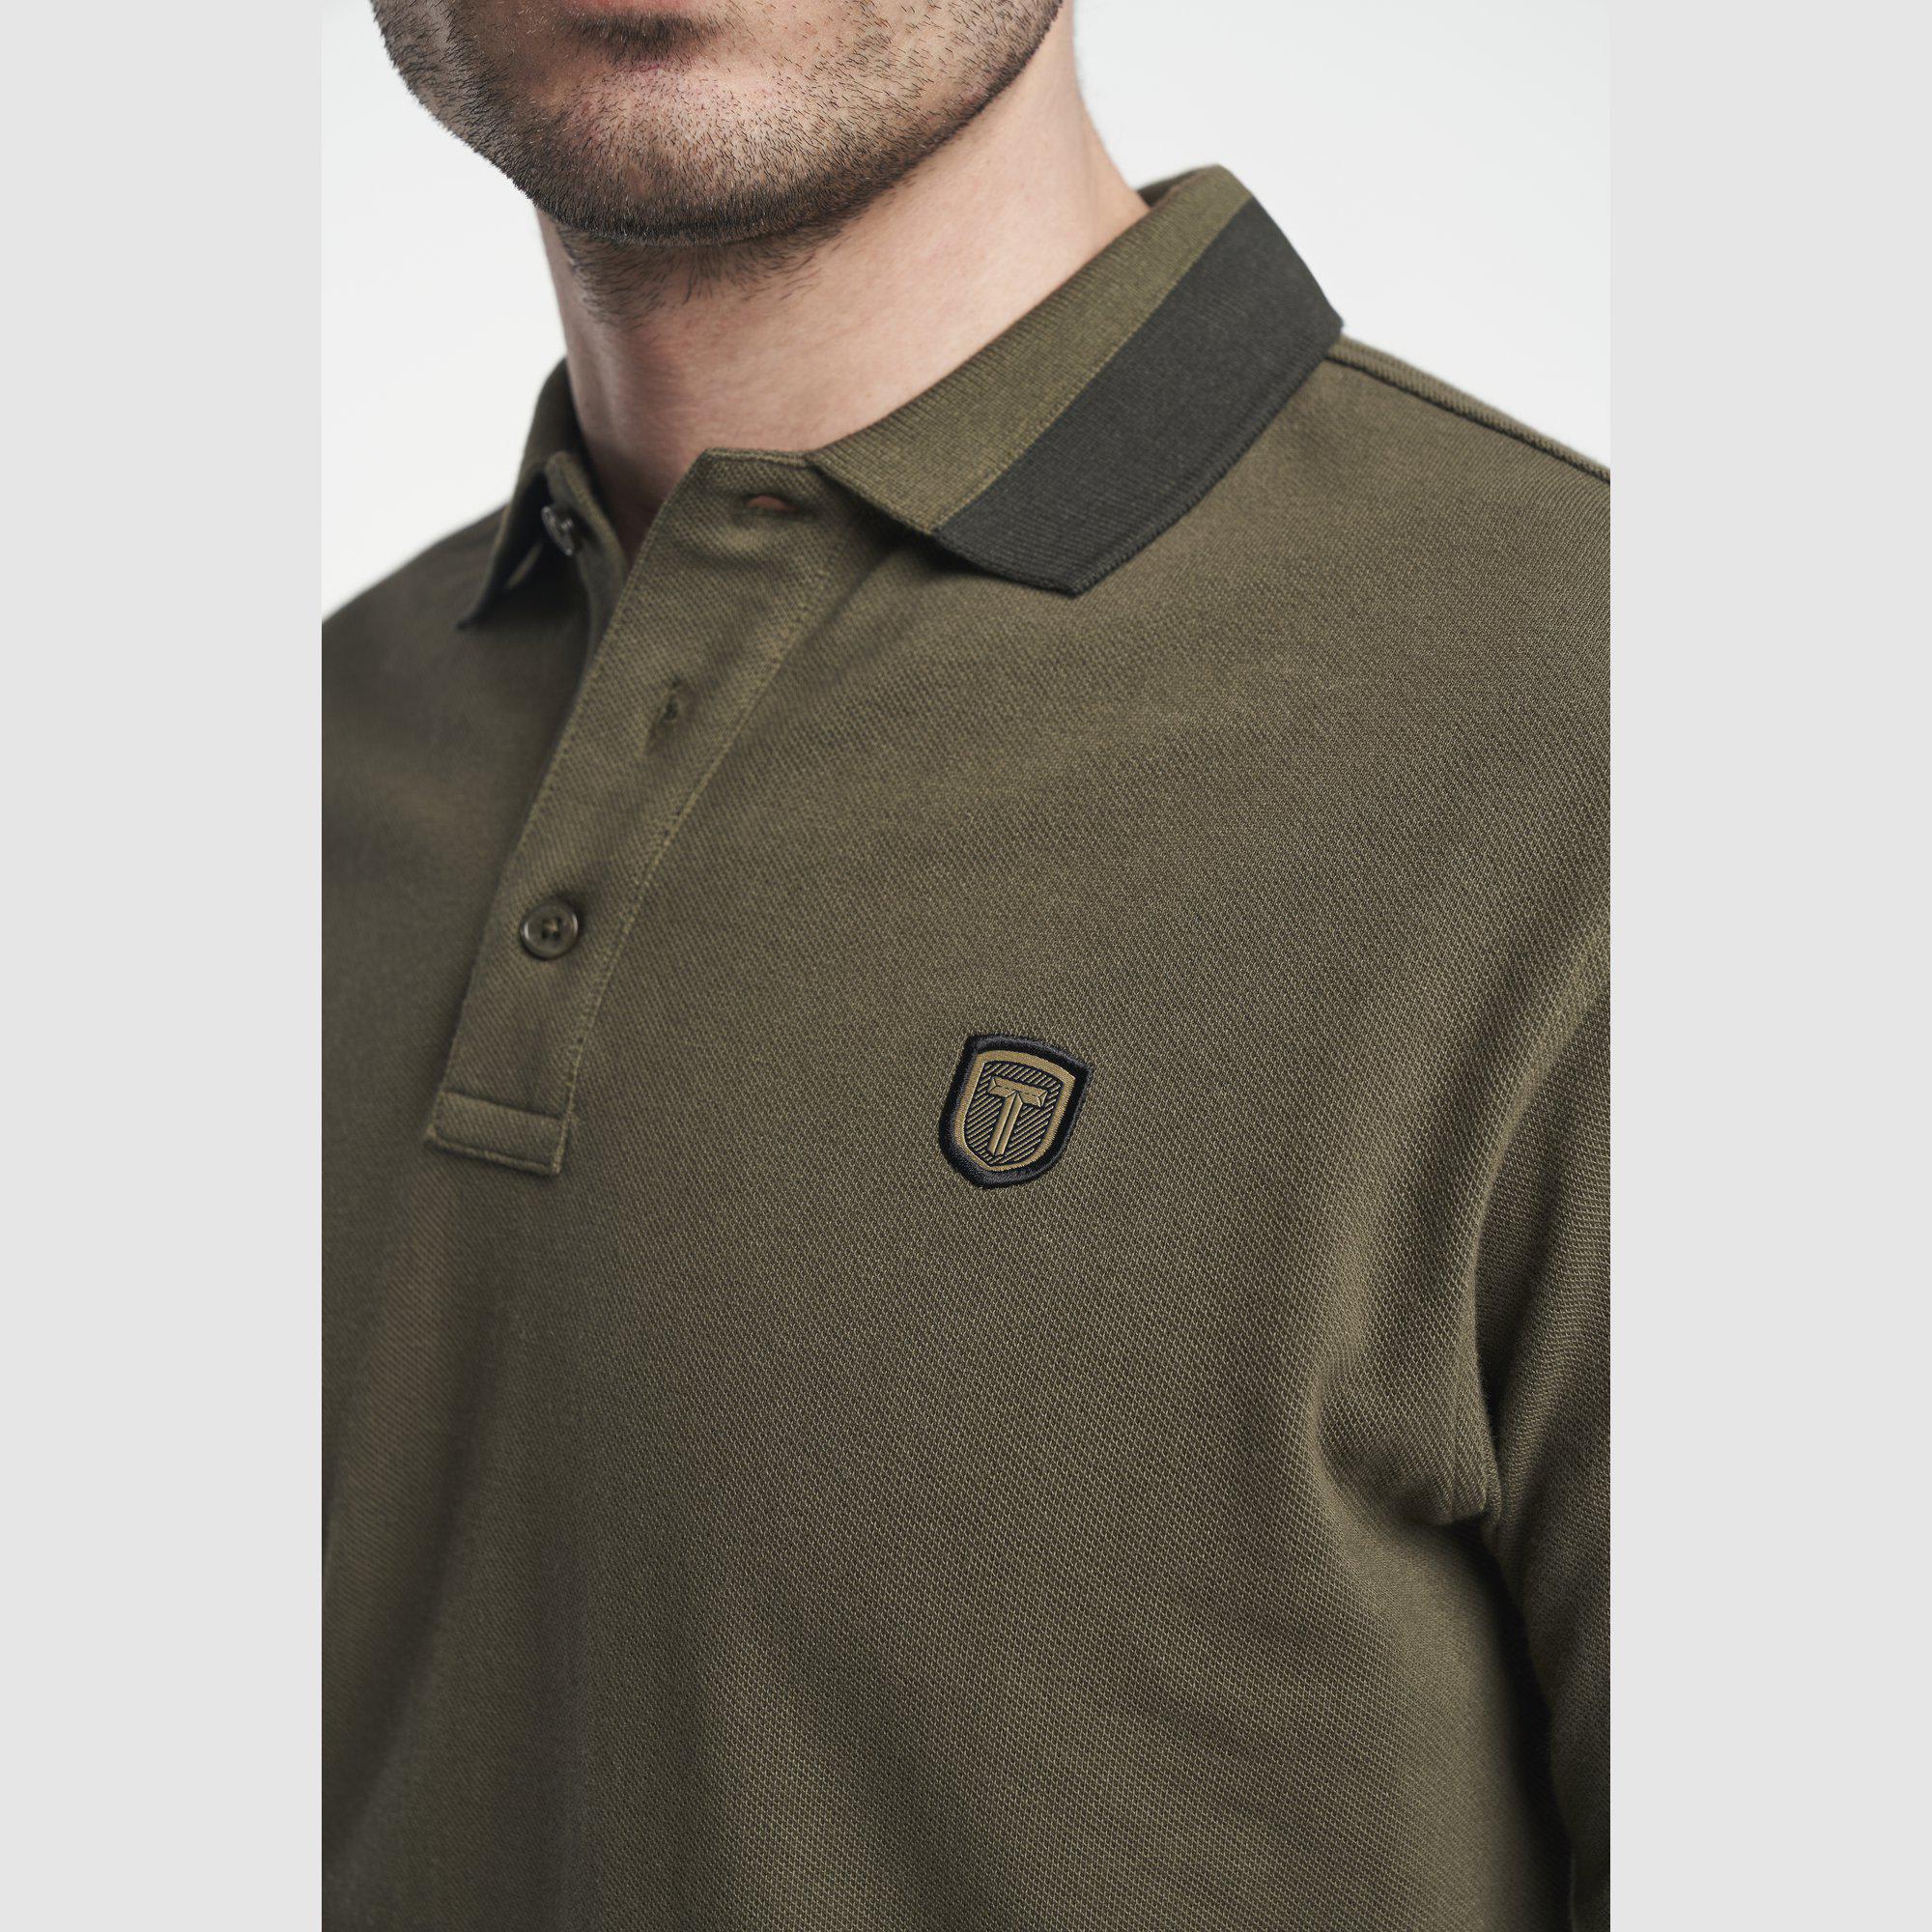 Essential Polo M, olive